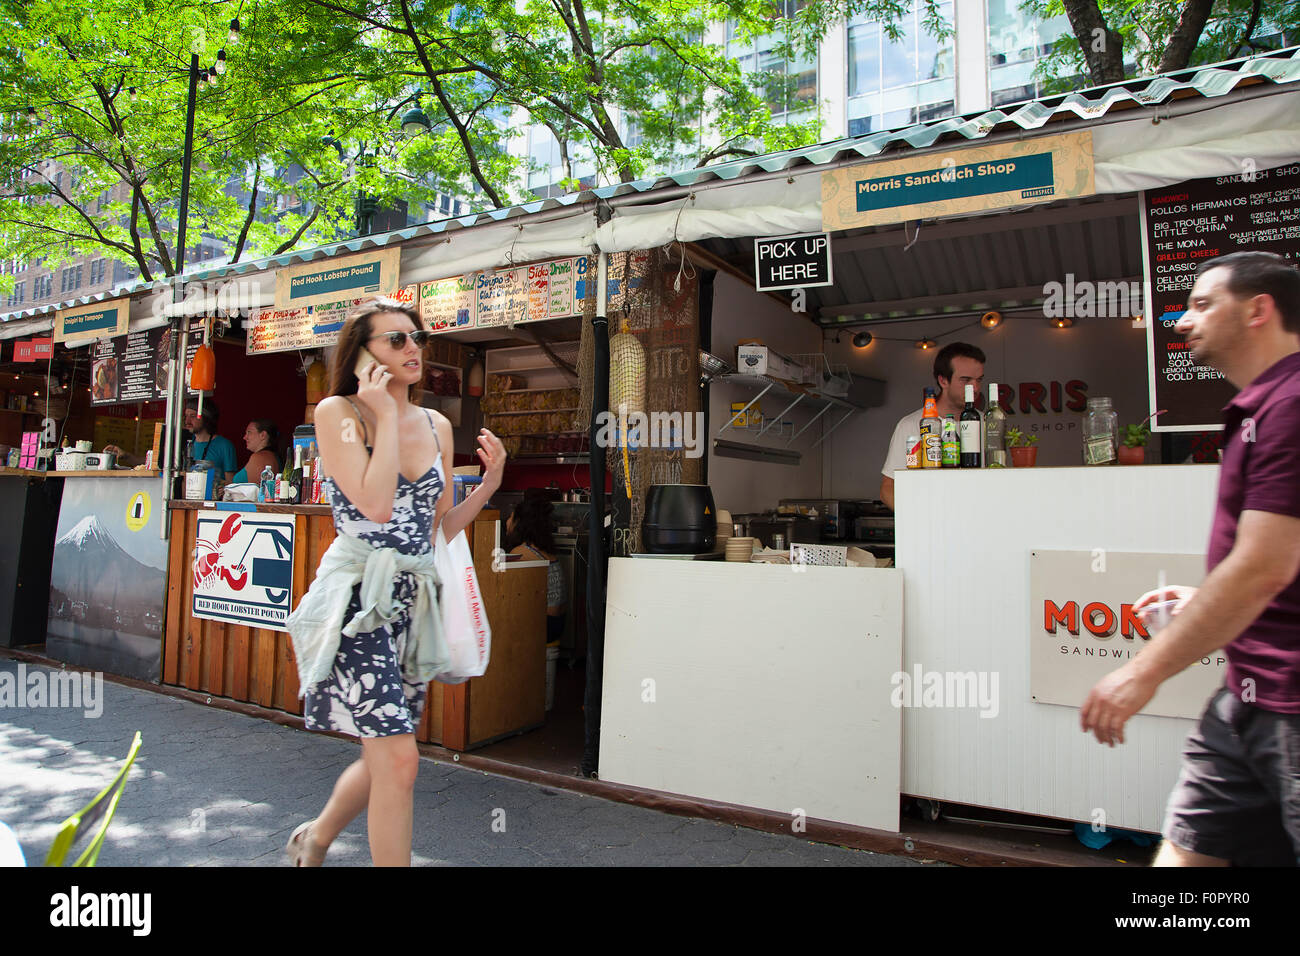 USA, New York State, New York City, Manhattan, Broadway Bisse saisonale Popup-Imbissbuden in Greeley Square Park. Stockfoto